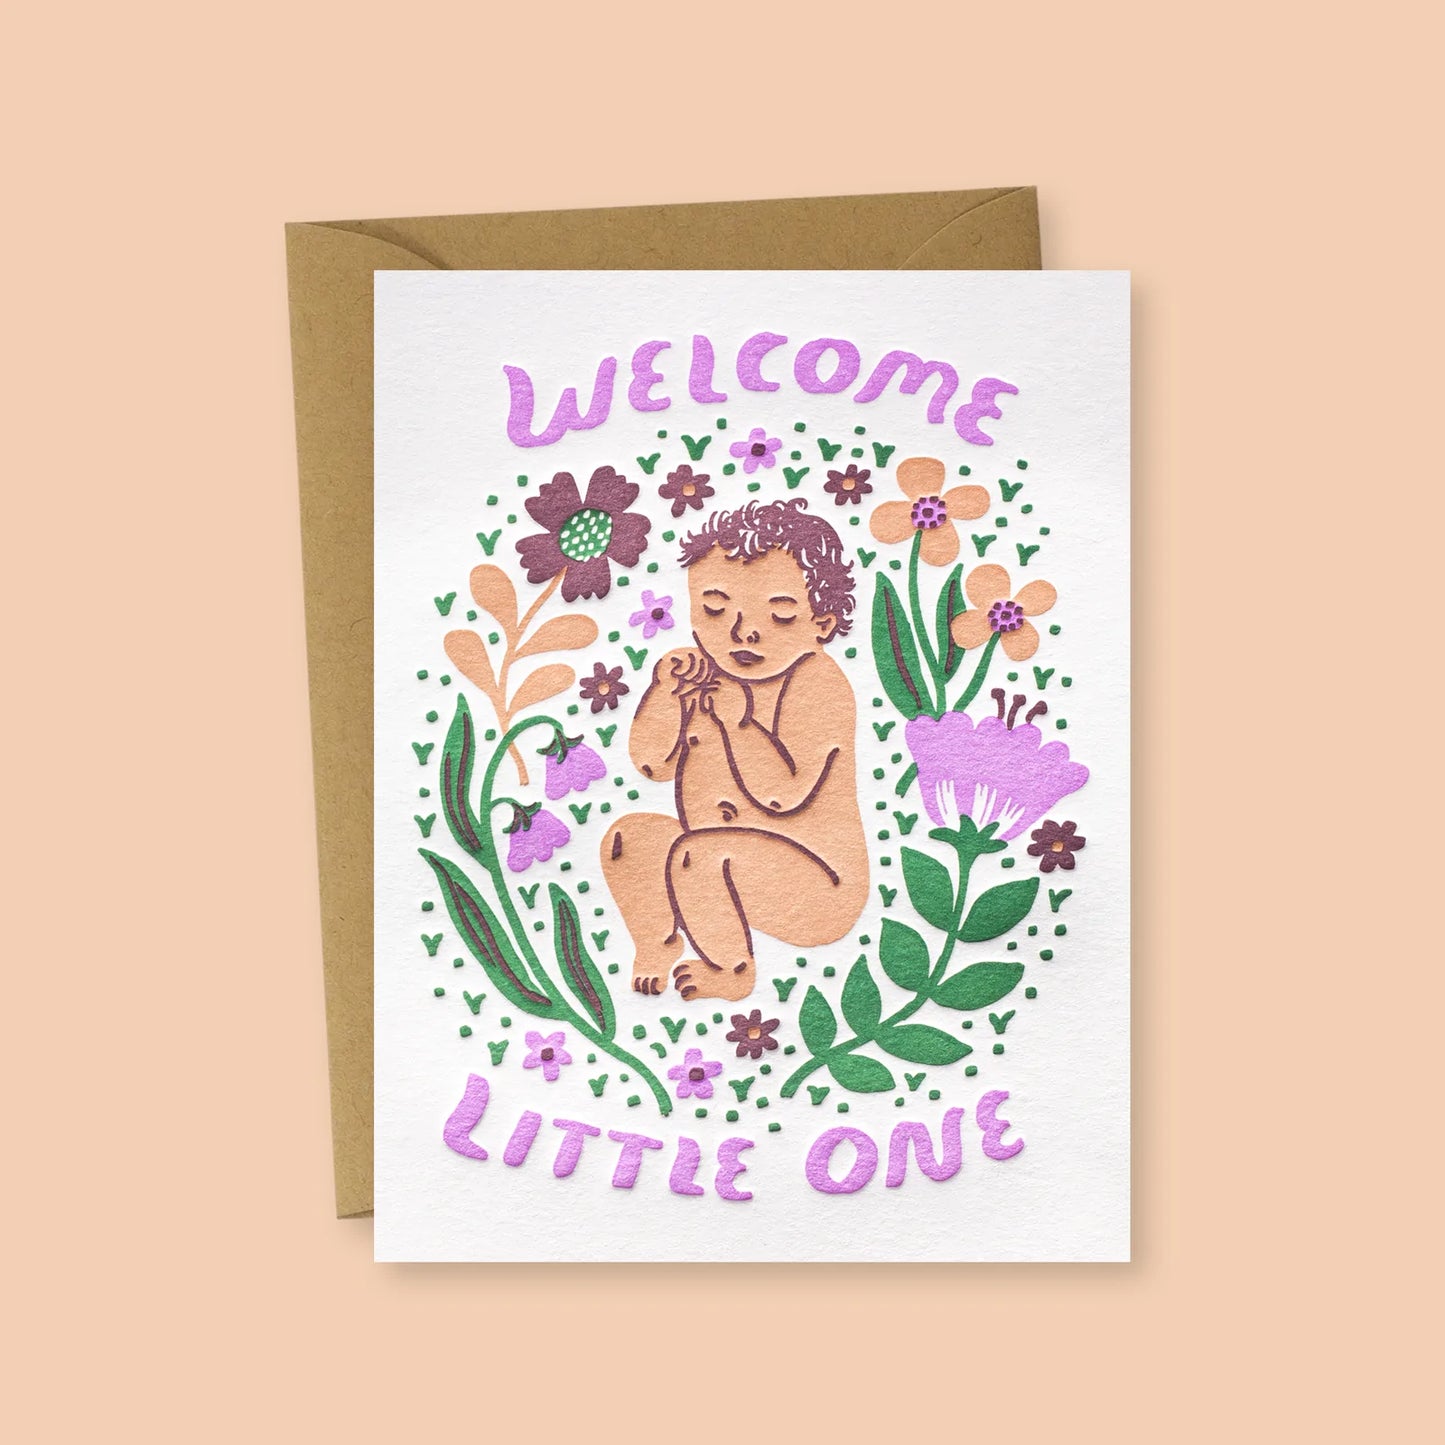 Phoebe Wahl Greeting Card — Welcome Little One (1)